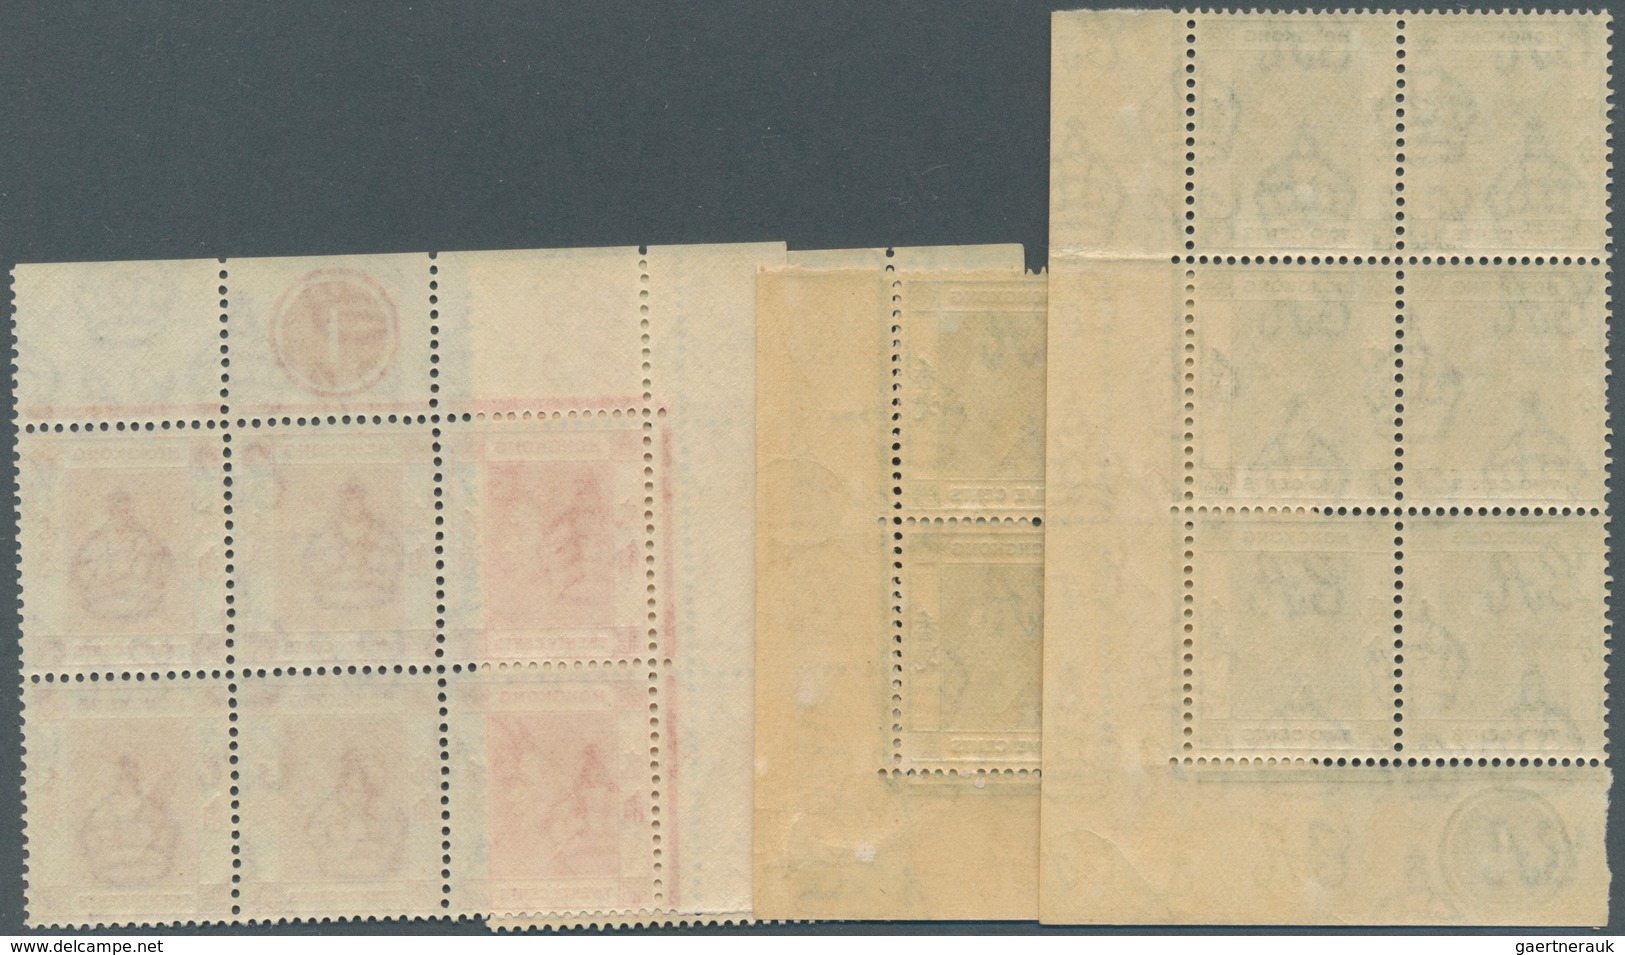 08584 Hongkong: 1938/1948, KGVI definitives 14 different stamps with many in pairs or blocks/4 and larger